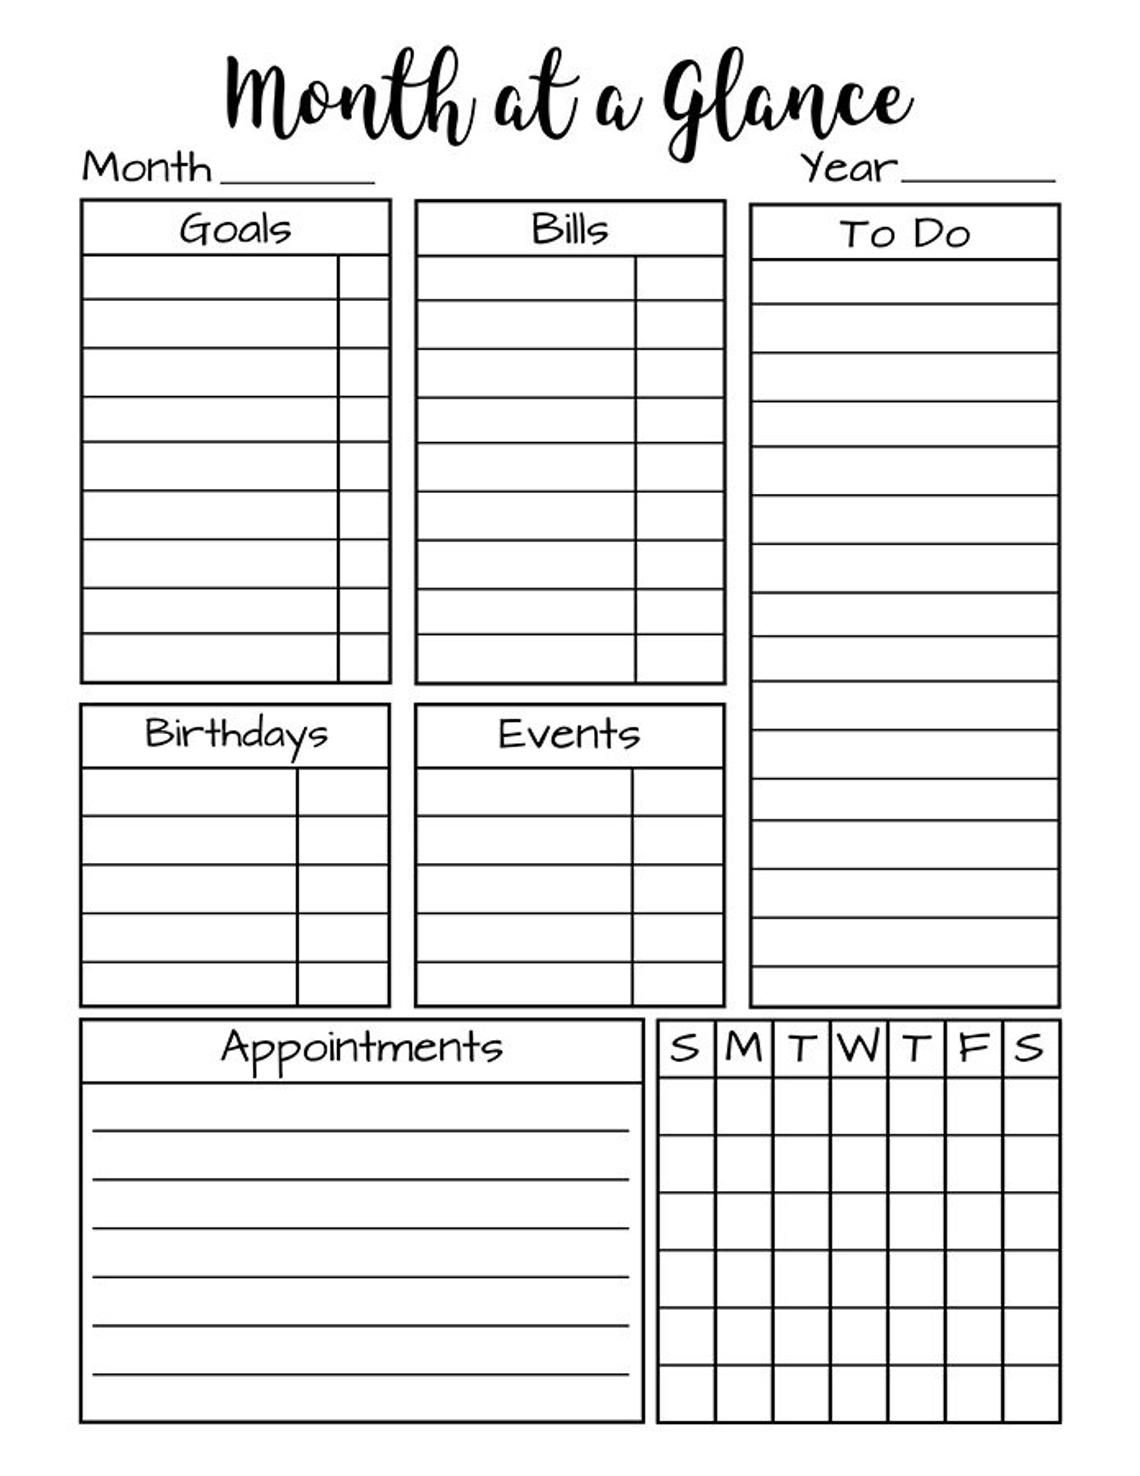 Month At A Glance Printable + Day At A Glance Bullet Journal pertaining to Month At A Glance Printable